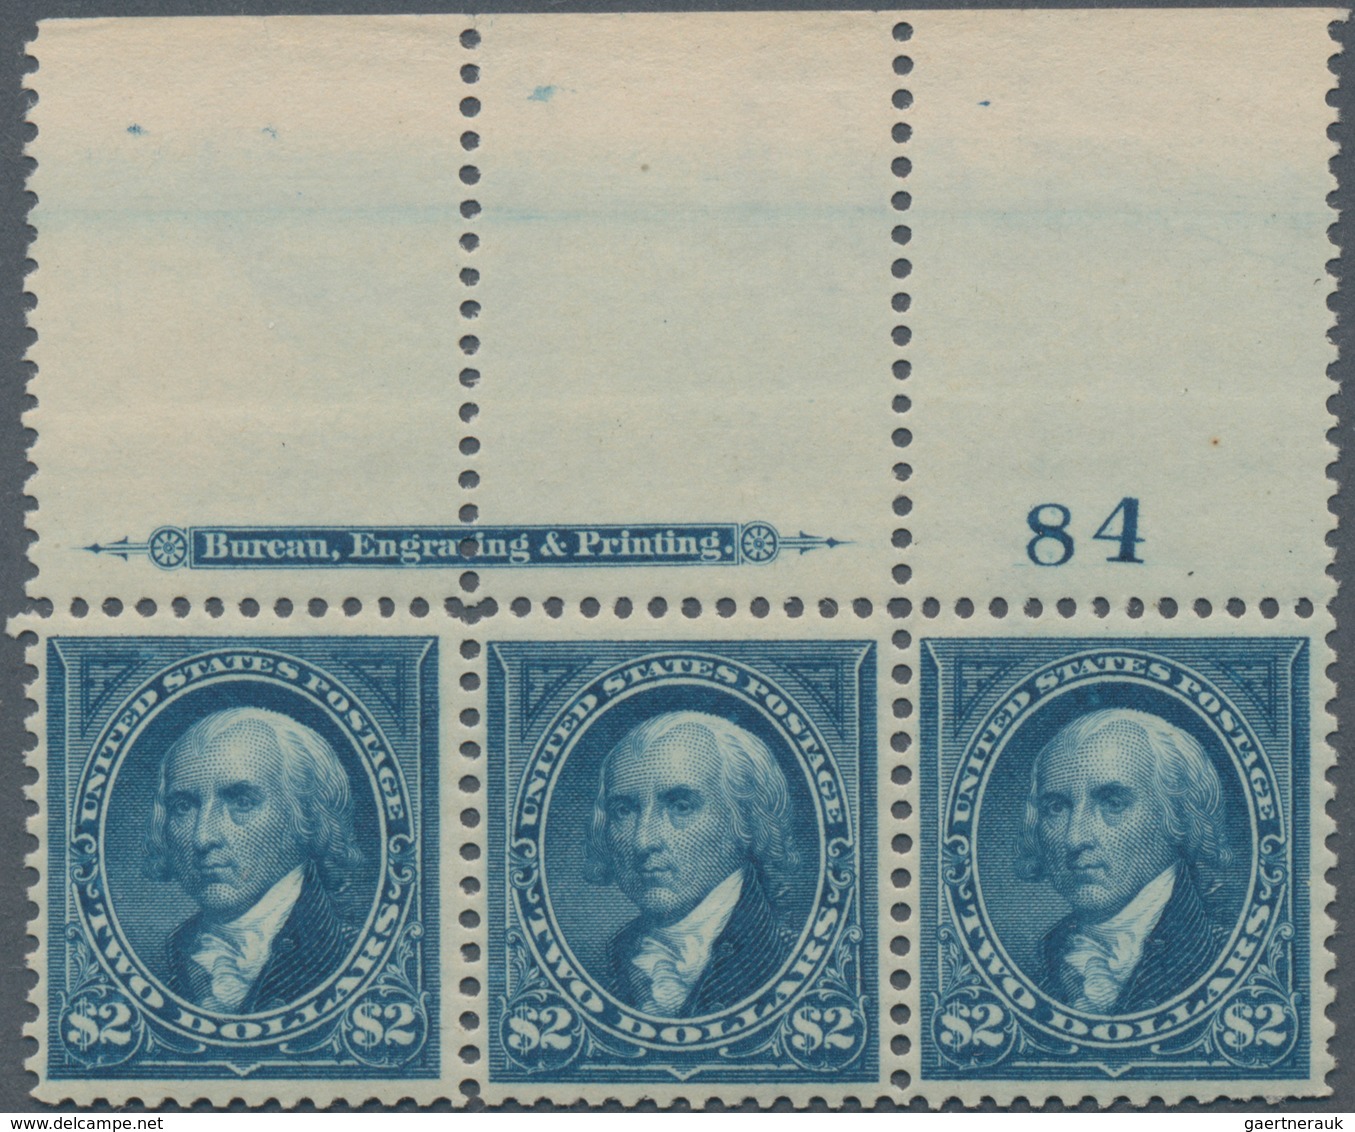 Vereinigte Staaten Von Amerika: $2.00 1895 Watermarked (Scott 277), Mint Full Top Plate No. 84 And I - Used Stamps